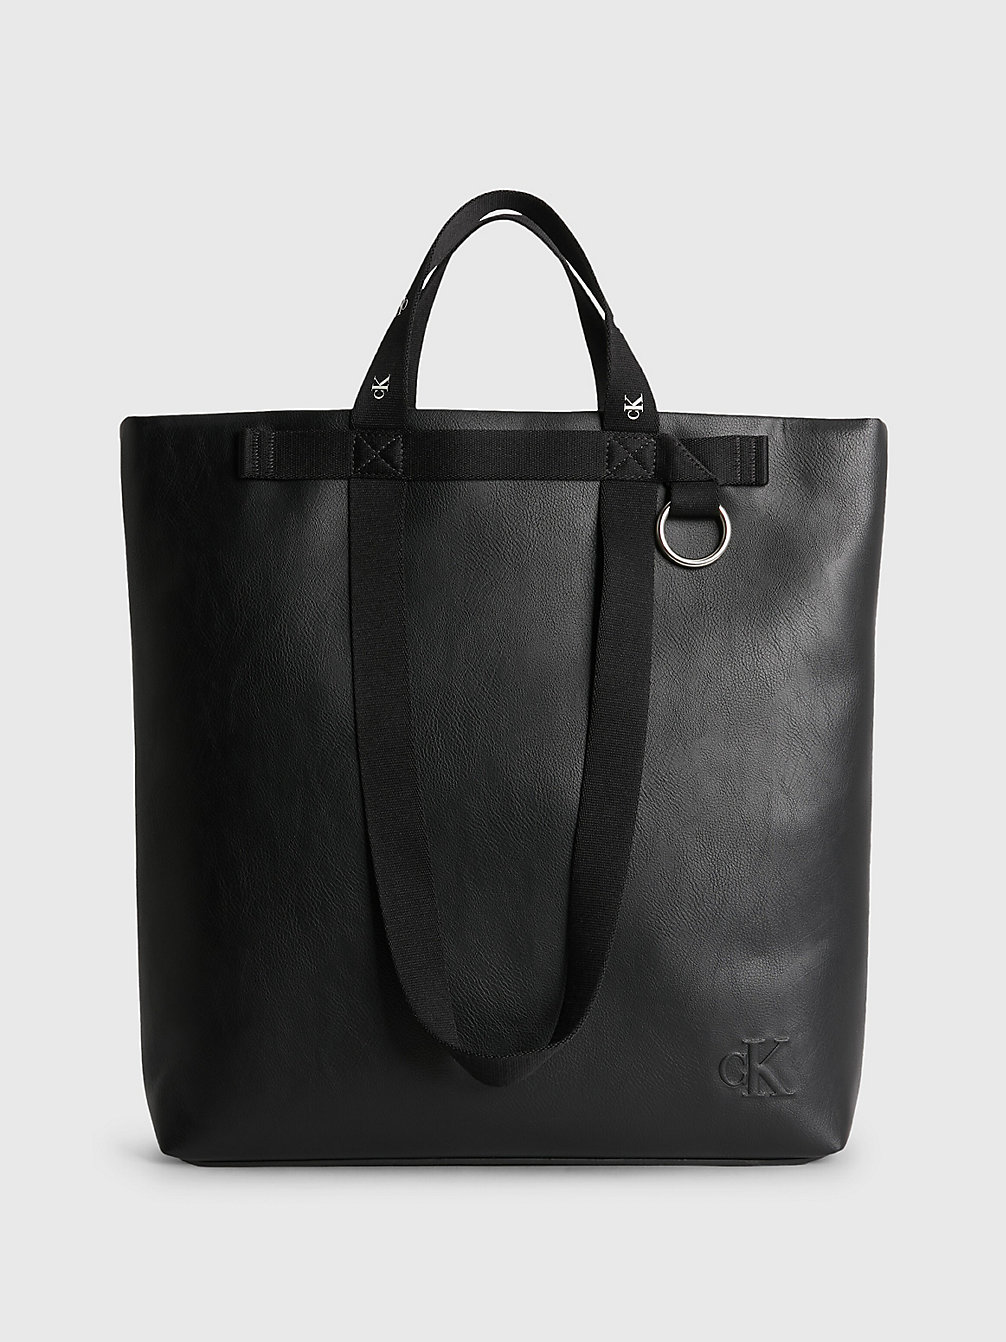 BLACK Recycled Square Tote Bag undefined women Calvin Klein